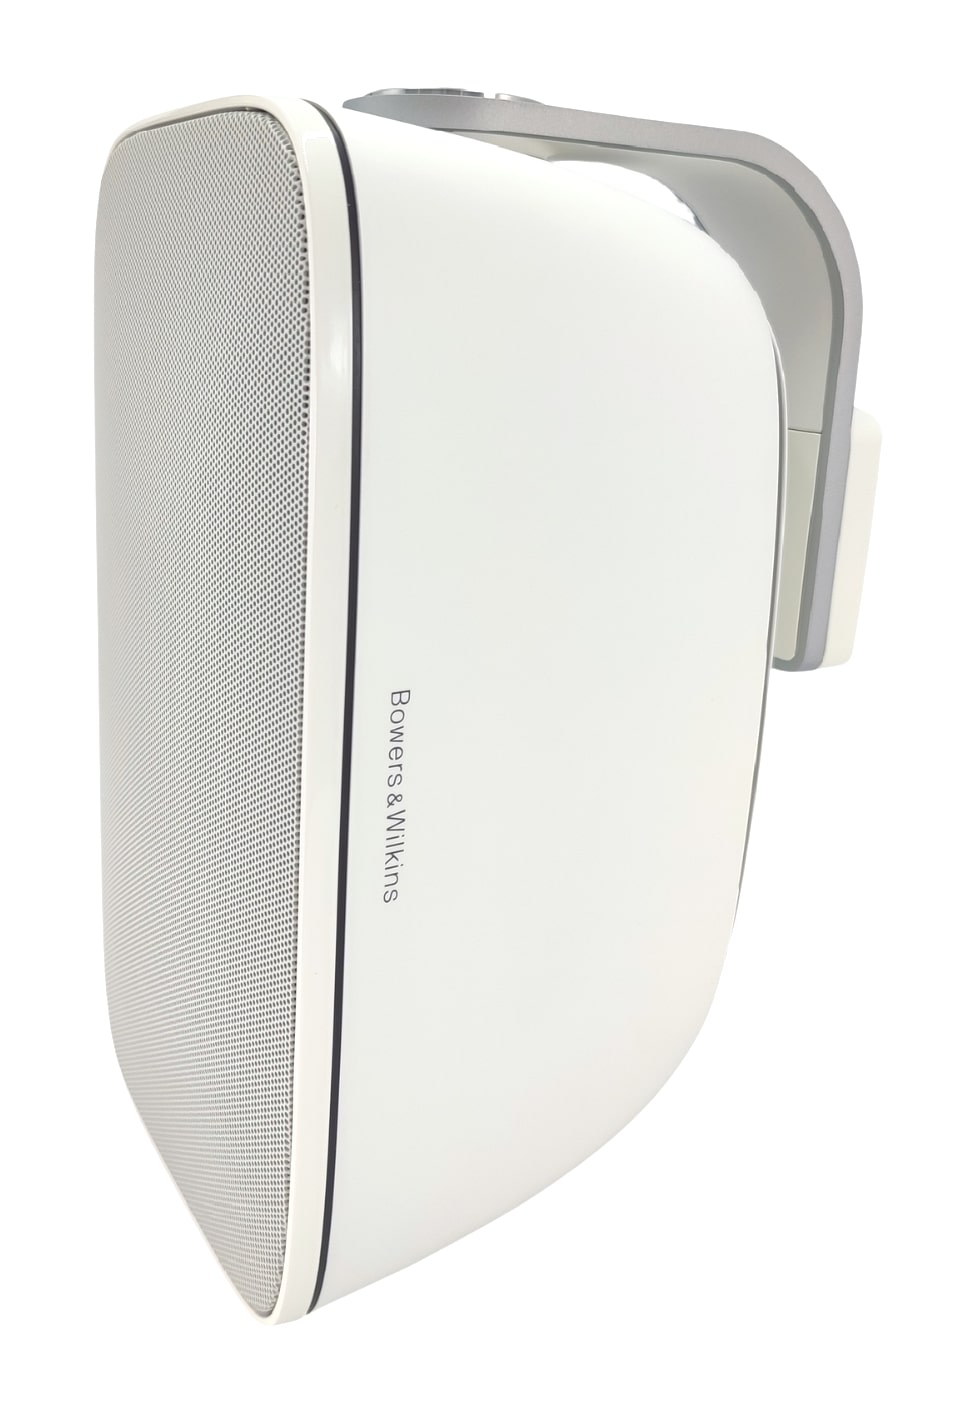 Bowers&Wilkins AM-1 White front